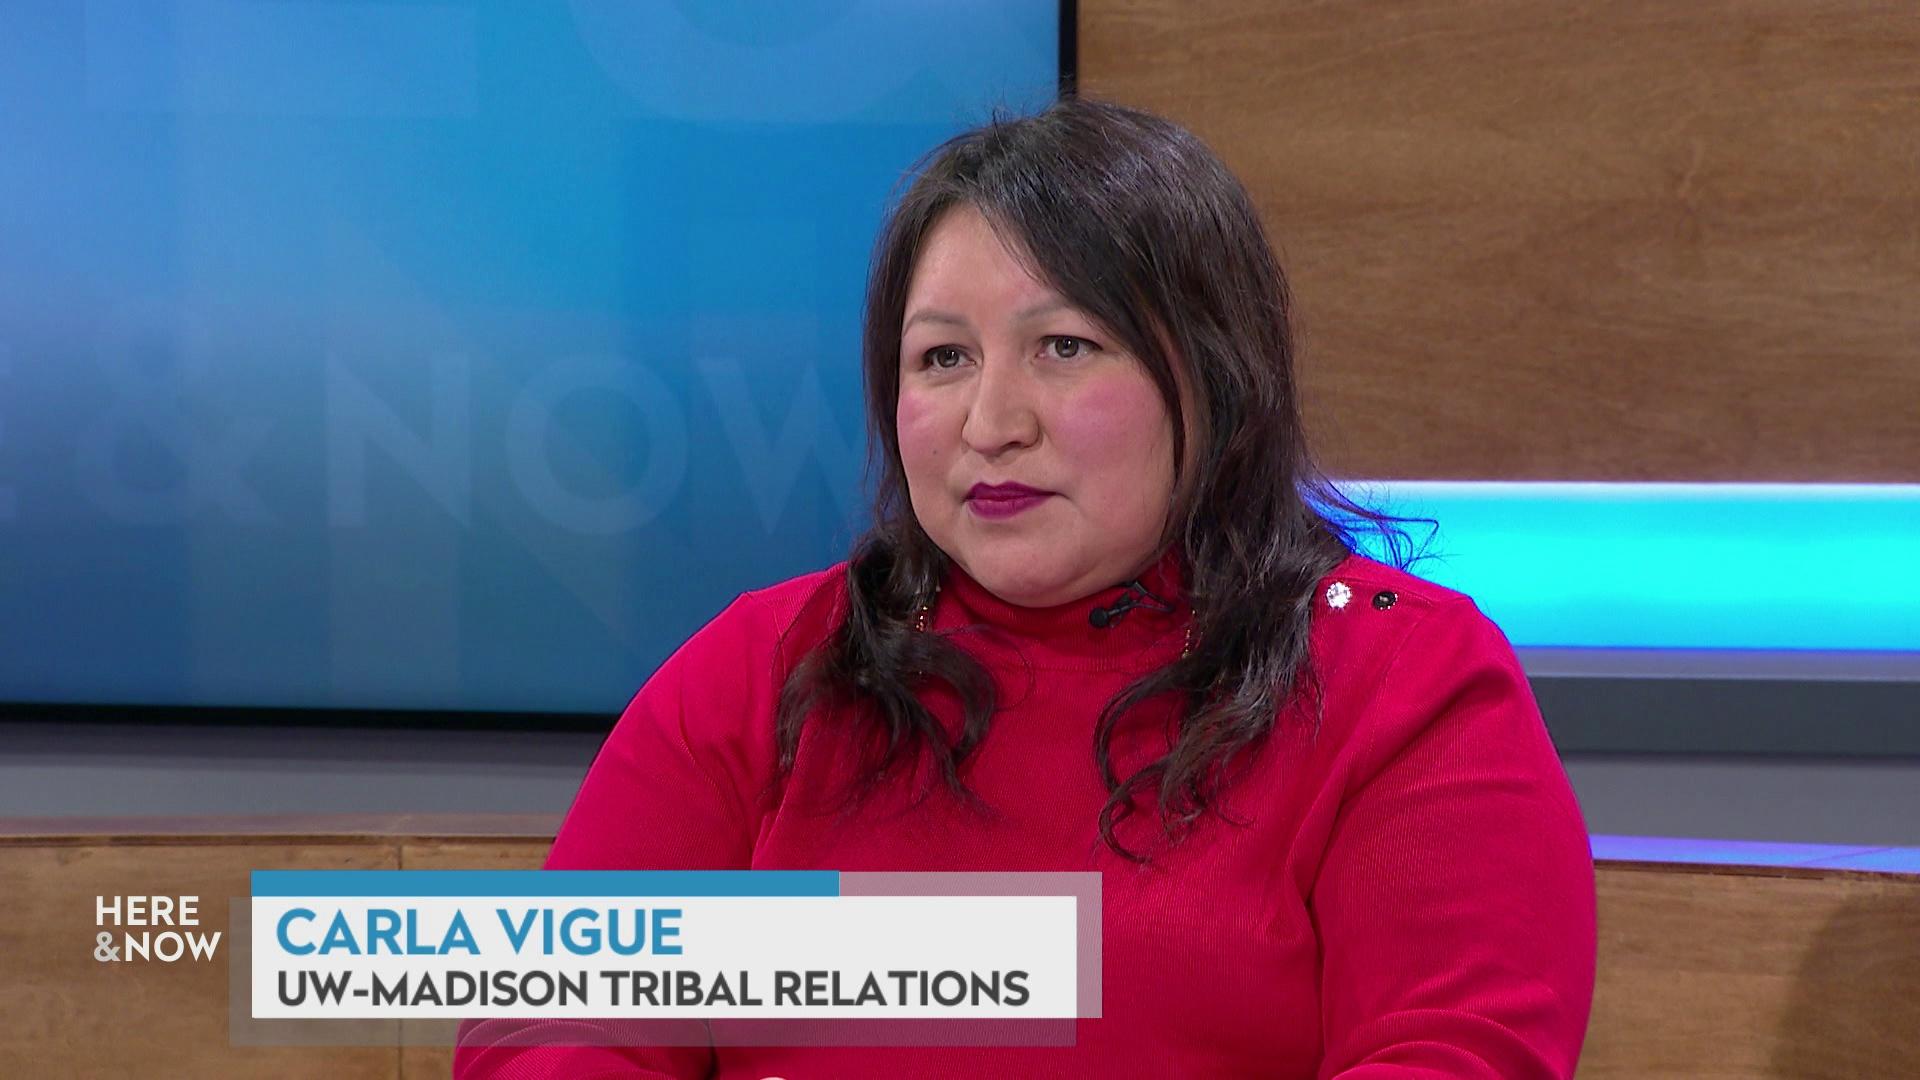 A still image shows Carla Vigue seated at the 'Here & Now' set featuring wood paneling, with a graphic at bottom reading 'Carla Vigue' and 'UW-Madison Tribal Relations.'